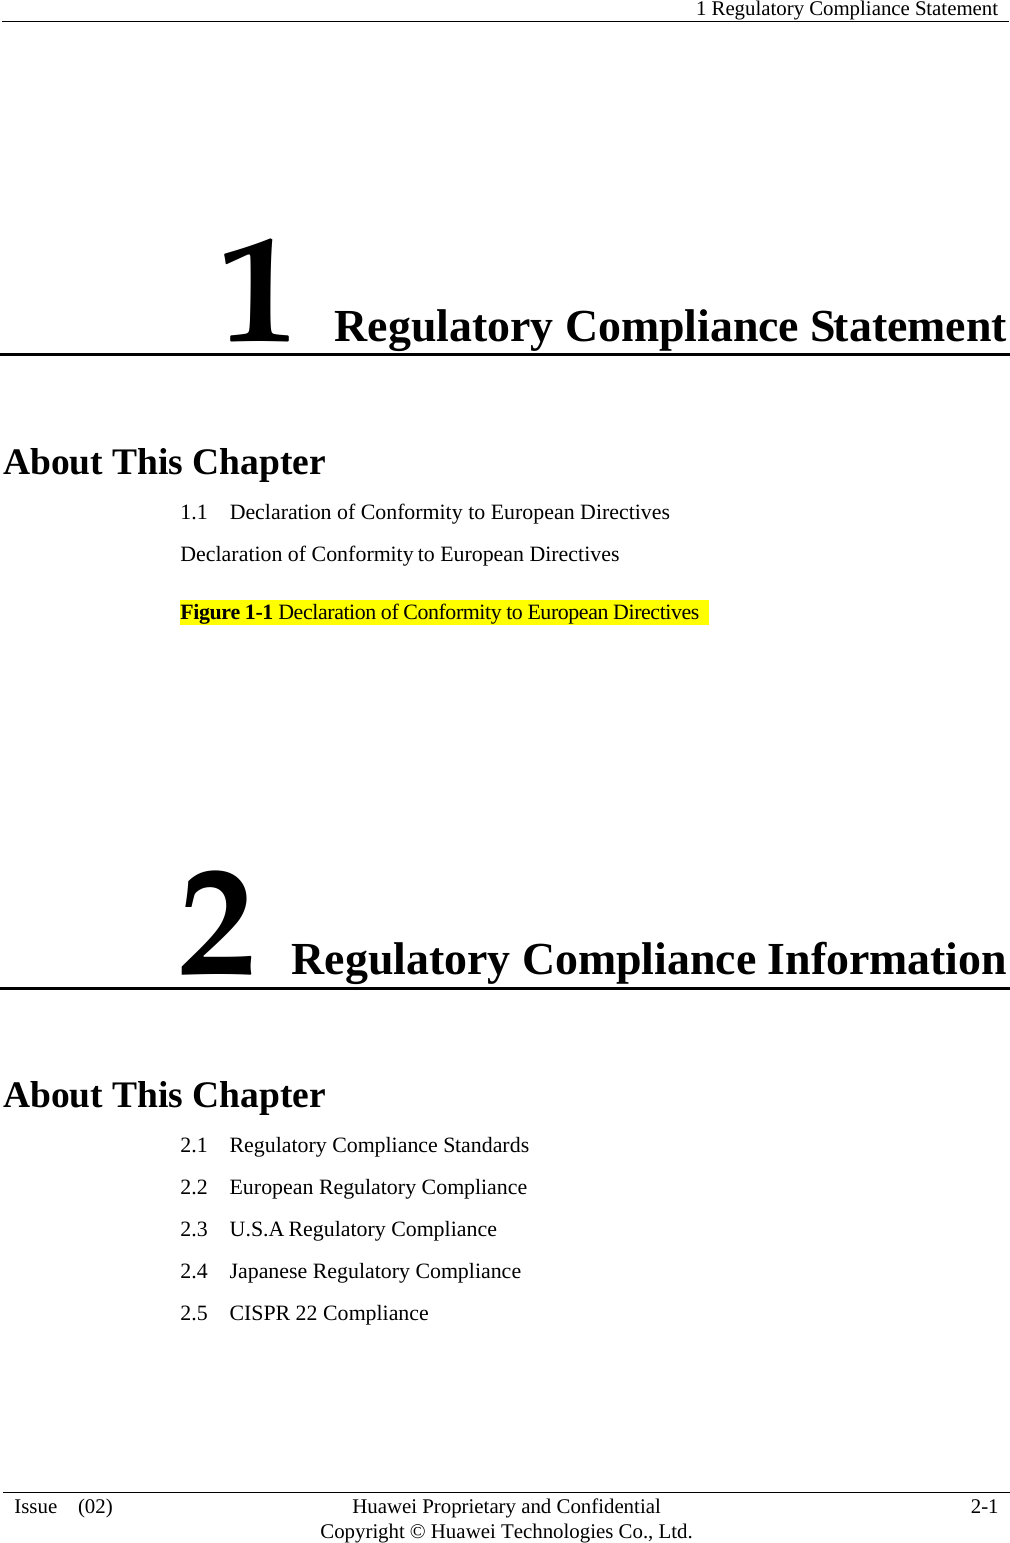   1 Regulatory Compliance Statement  Issue  (02)  Huawei Proprietary and Confidential     Copyright © Huawei Technologies Co., Ltd.  2-1  1 Regulatory Compliance Statement About This Chapter 1.1    Declaration of Conformity to European Directives Declaration of Conformity to European Directives Figure 1-1 Declaration of Conformity to European Directives    2 Regulatory Compliance Information About This Chapter 2.1    Regulatory Compliance Standards 2.2  European Regulatory Compliance 2.3  U.S.A Regulatory Compliance 2.4  Japanese Regulatory Compliance 2.5    CISPR 22 Compliance 